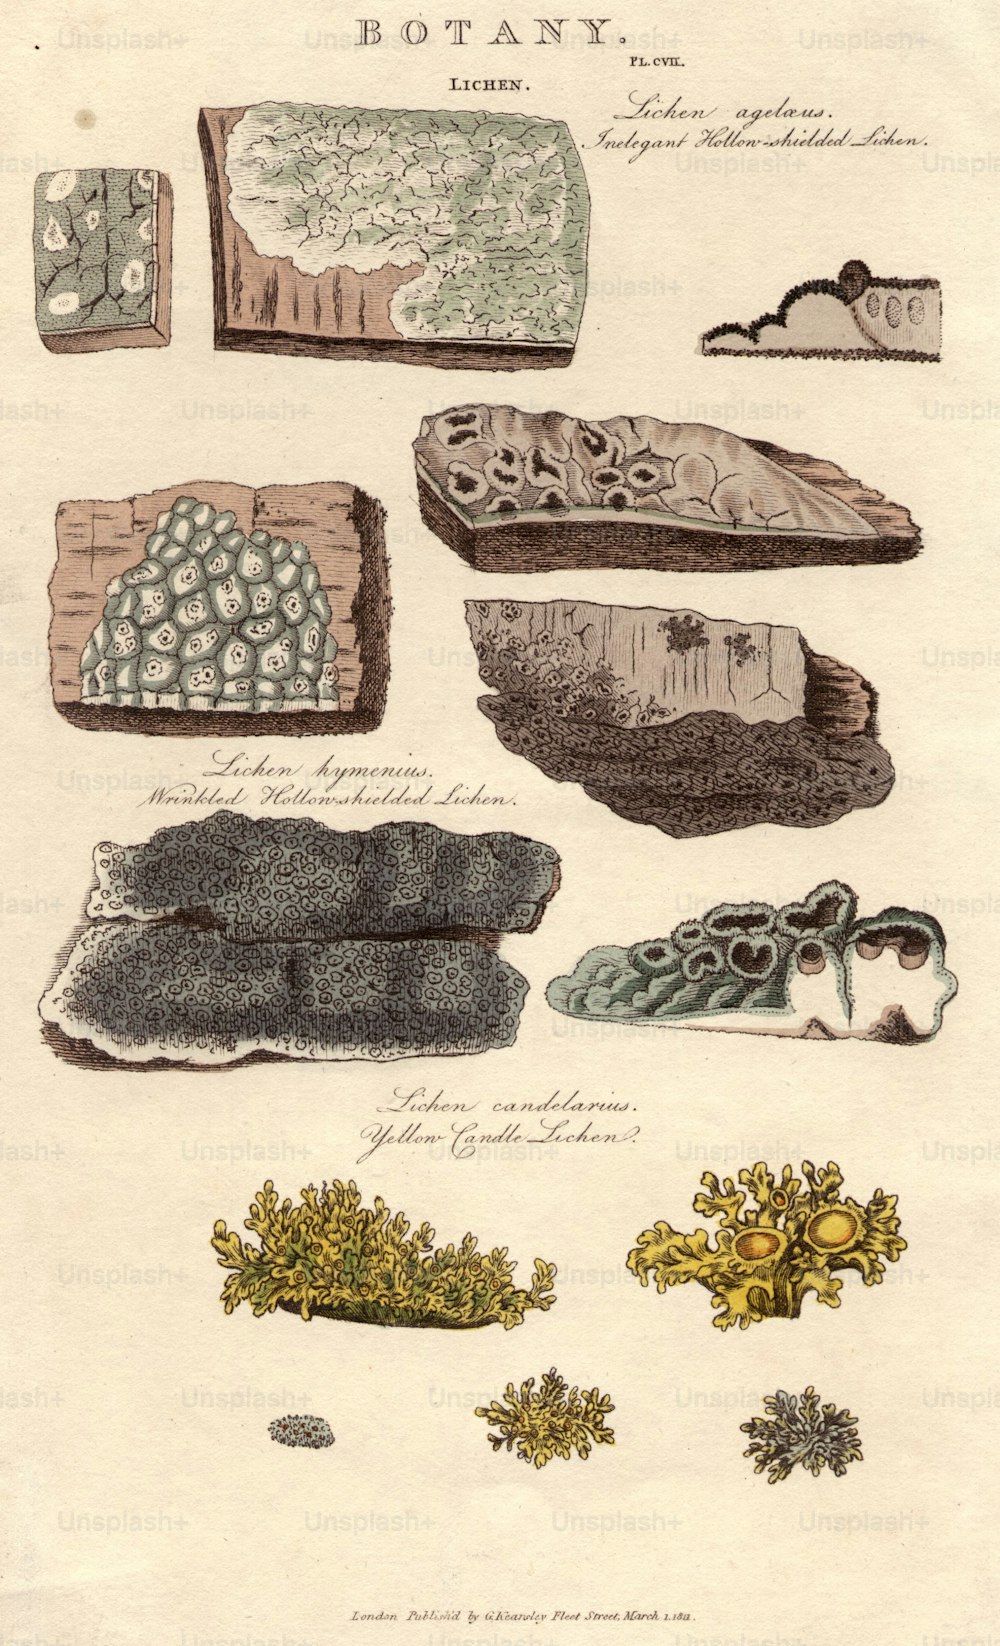 1st March 1812:  Various species of lichen: inelegant hollow-shielded lichen (top), wrinkled hollow-shielded lichen (centre) and yellow candle lichen (bottom).  (Photo by Hulton Archive/Getty Images)